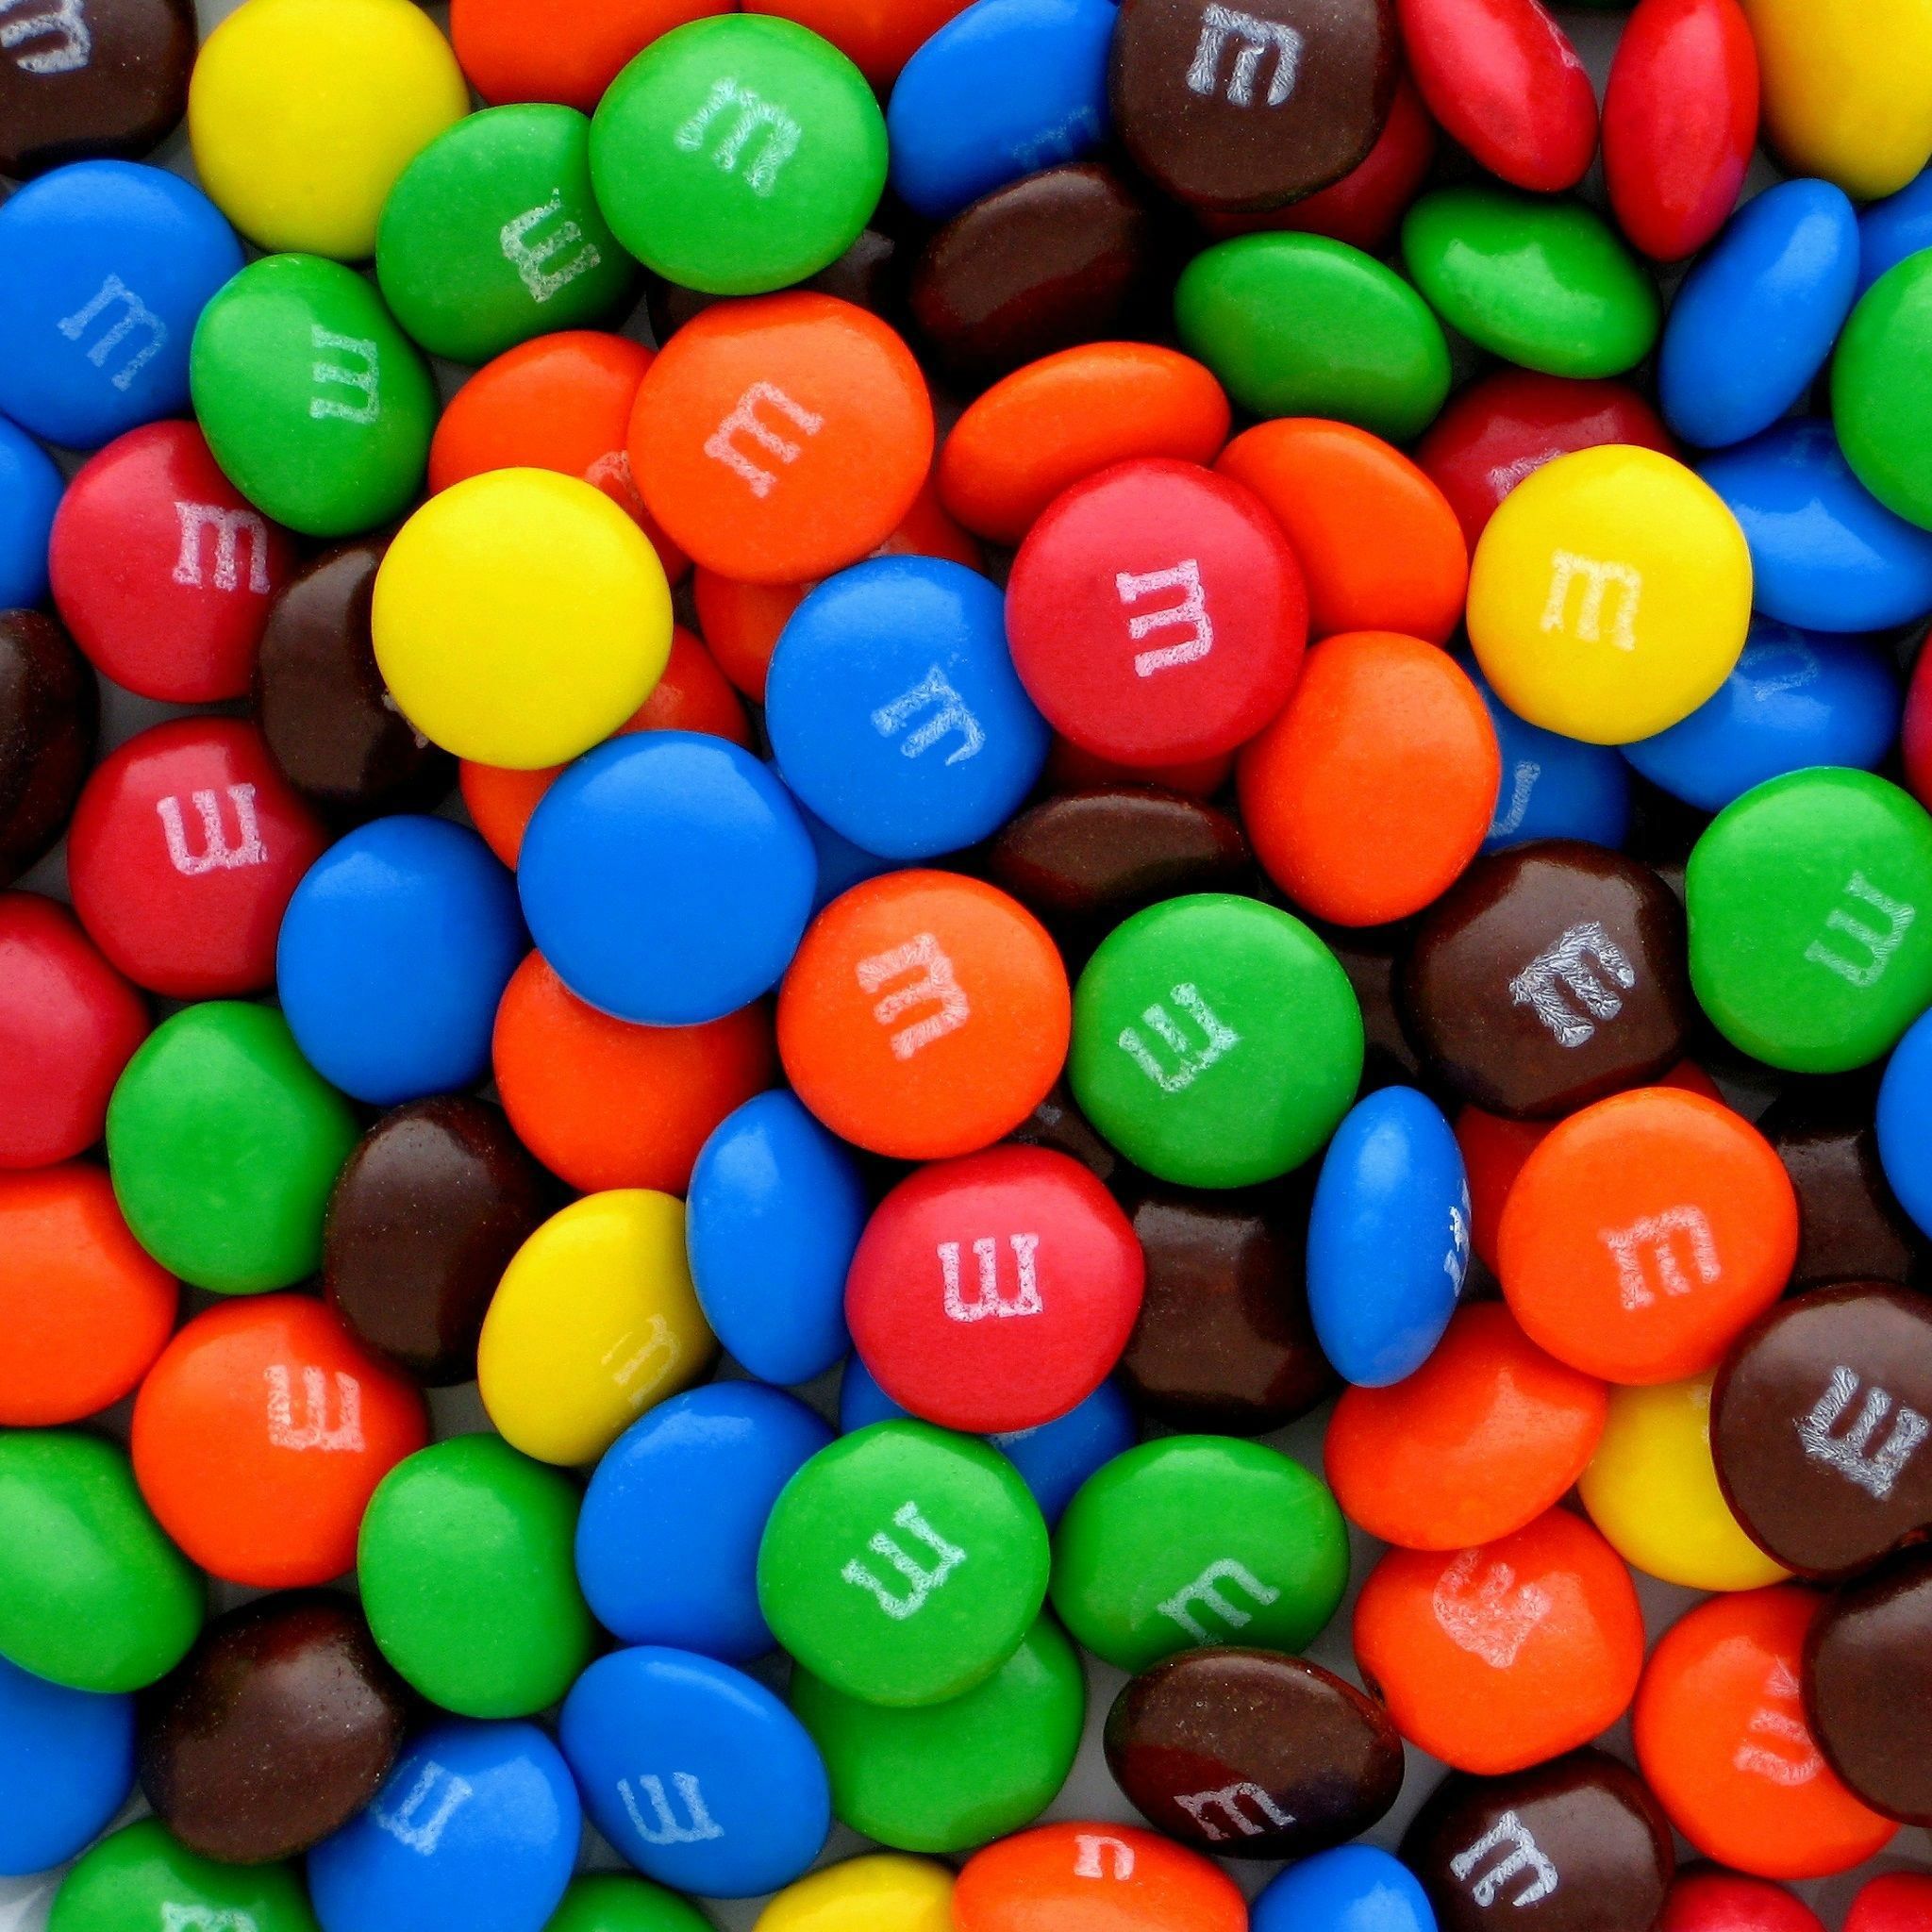 Colorful M&Ms Candy Pills Overlap iPad Air Wallpaper Free Download